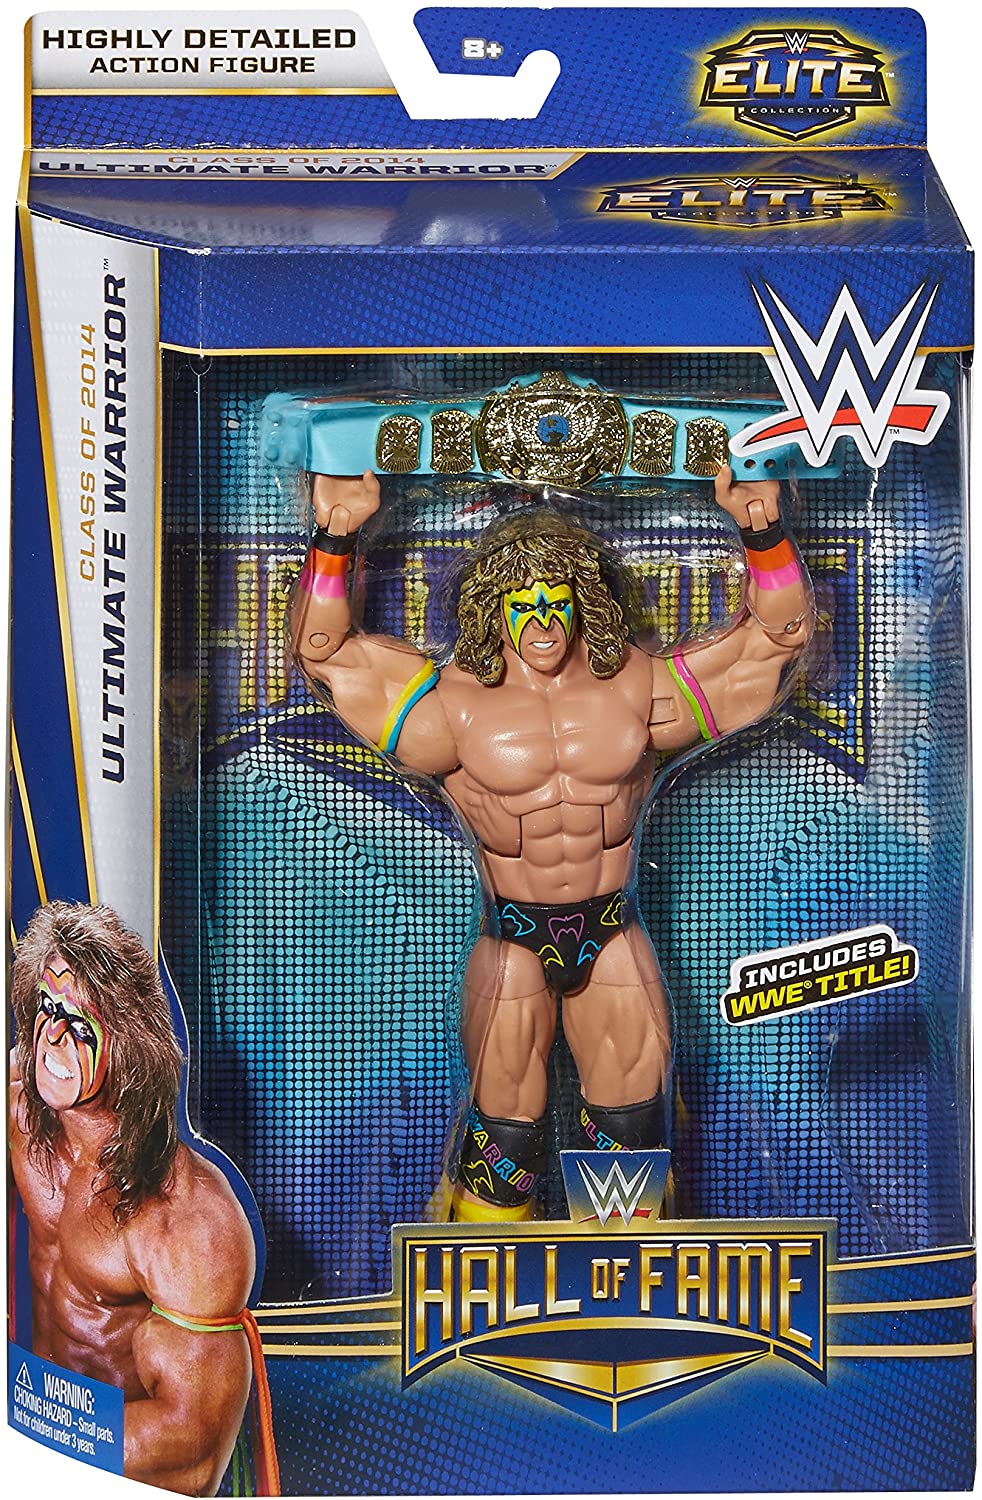 WWE Elite Collection Hall of Fame Ultimate Warrior